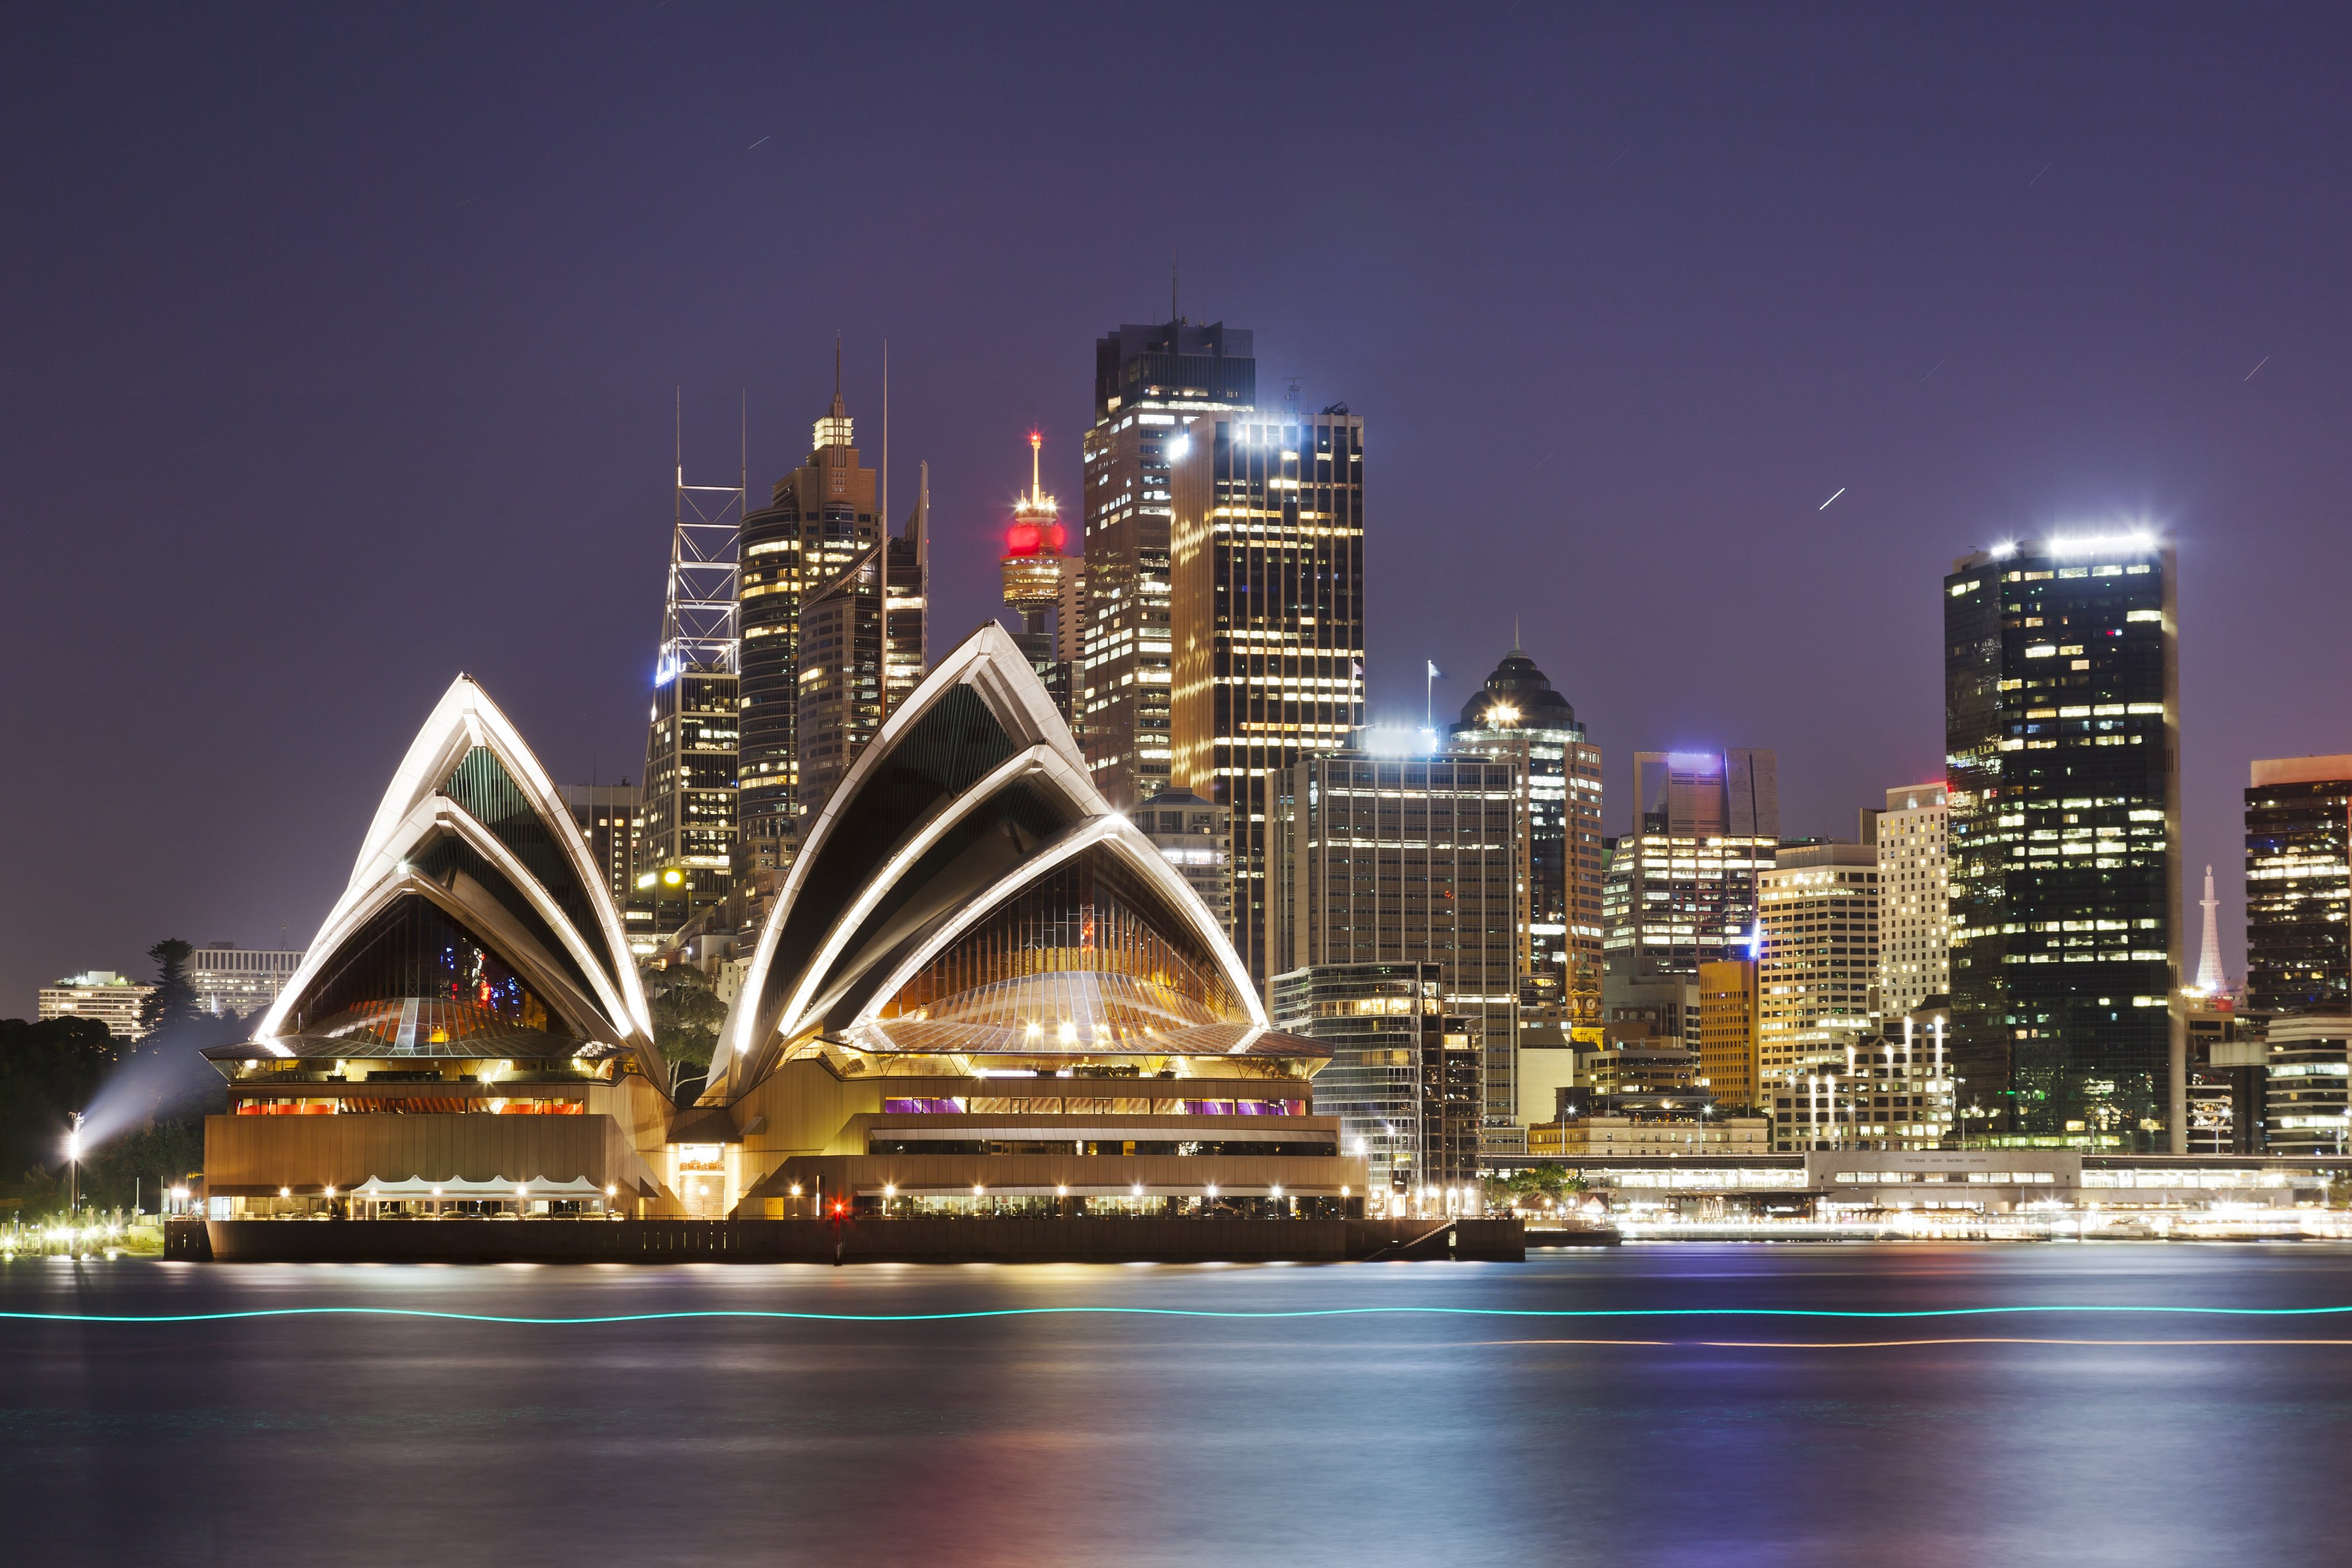 The Sydney Opera House and central business district at night. Photo: Shutterstock